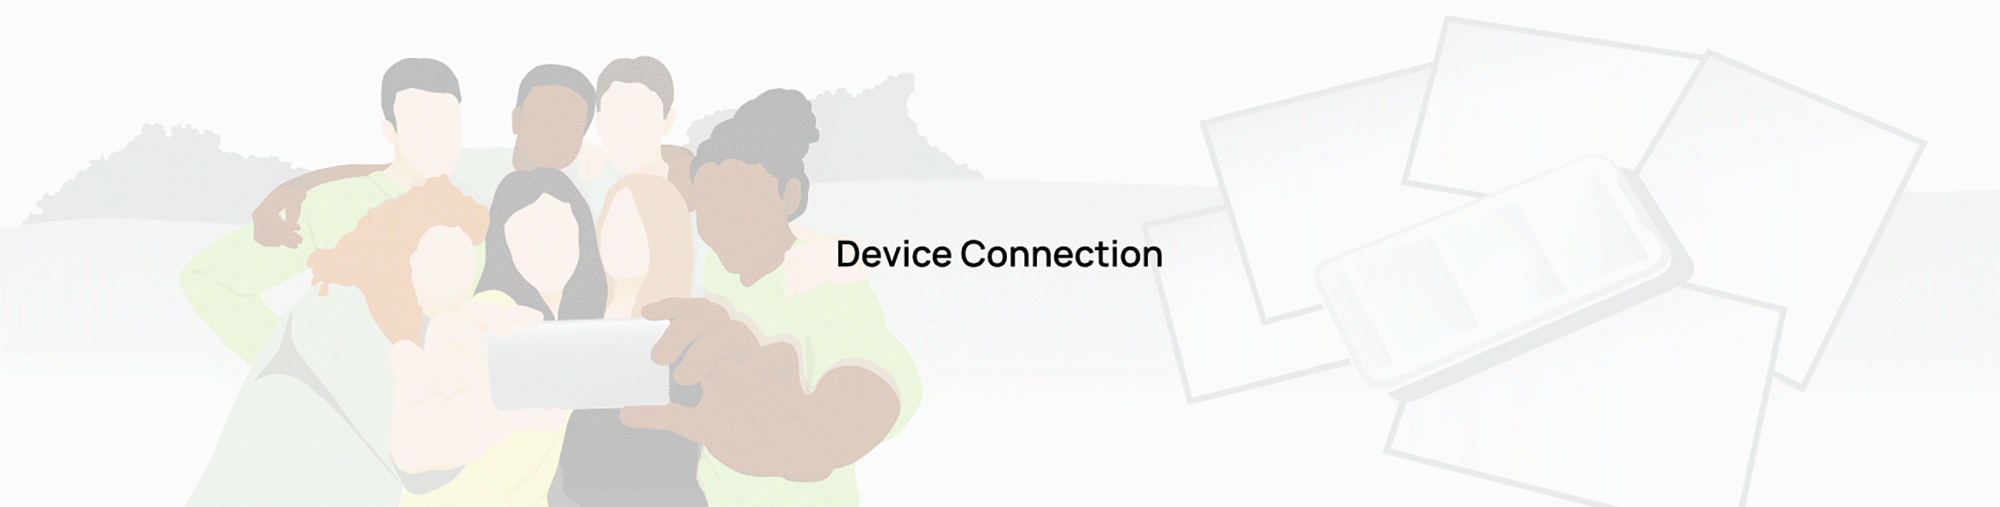 Device connection animation